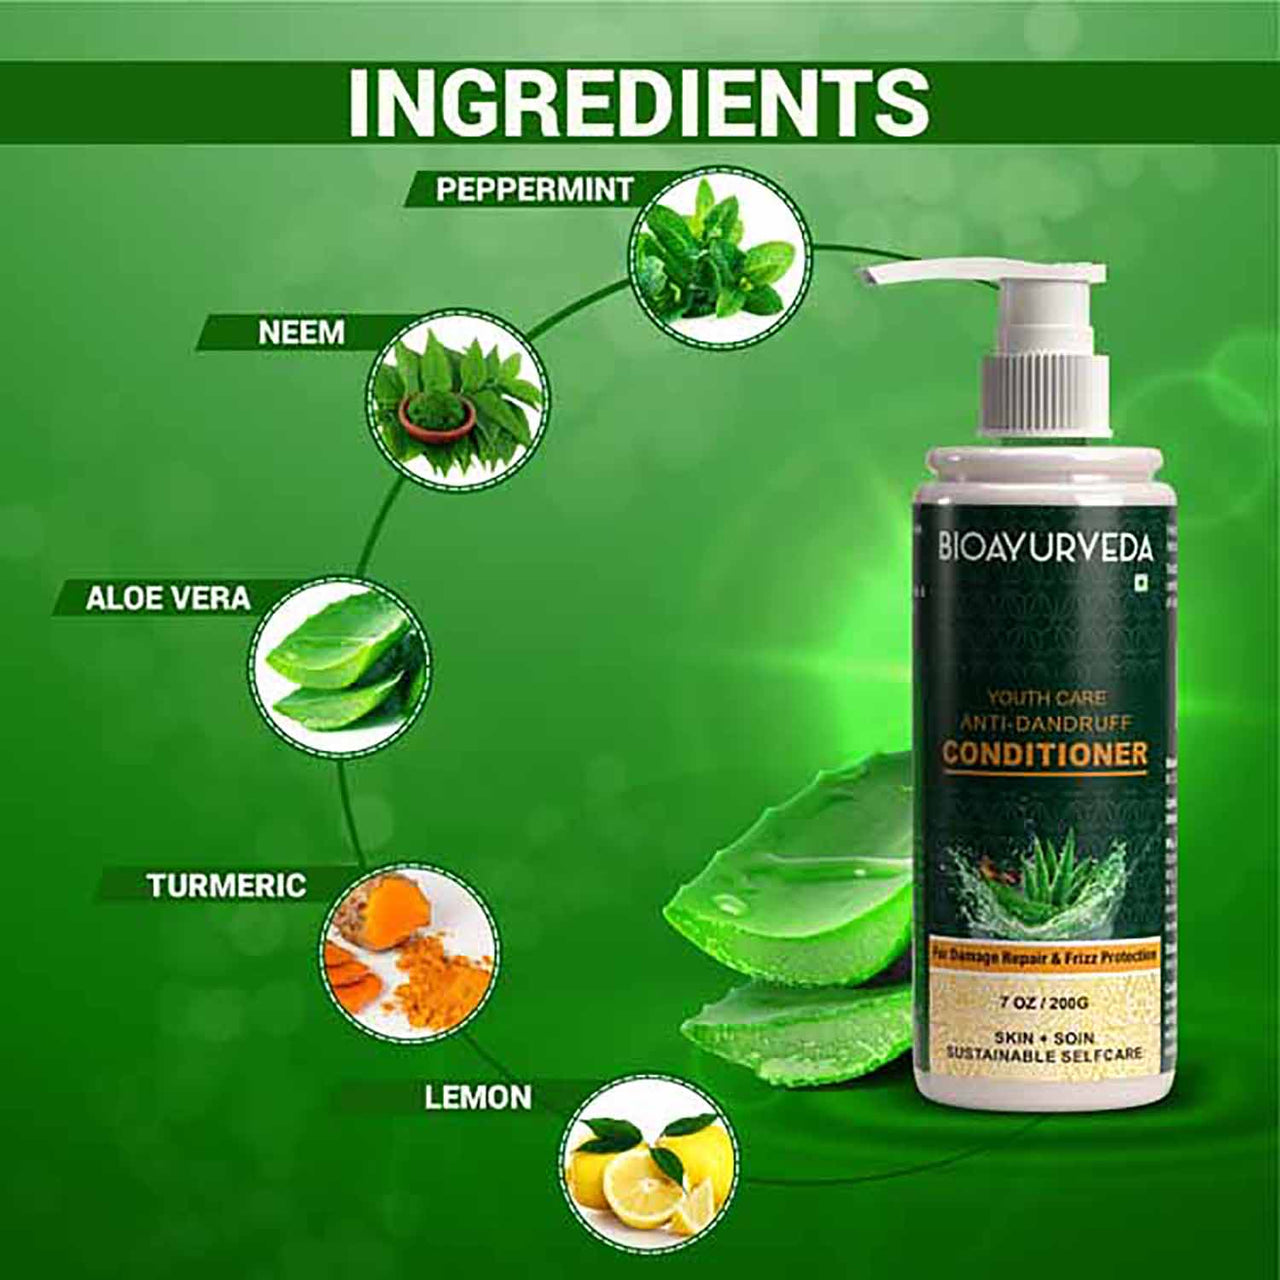 Youth Care Anti Dandruff Conditioner Ingredients